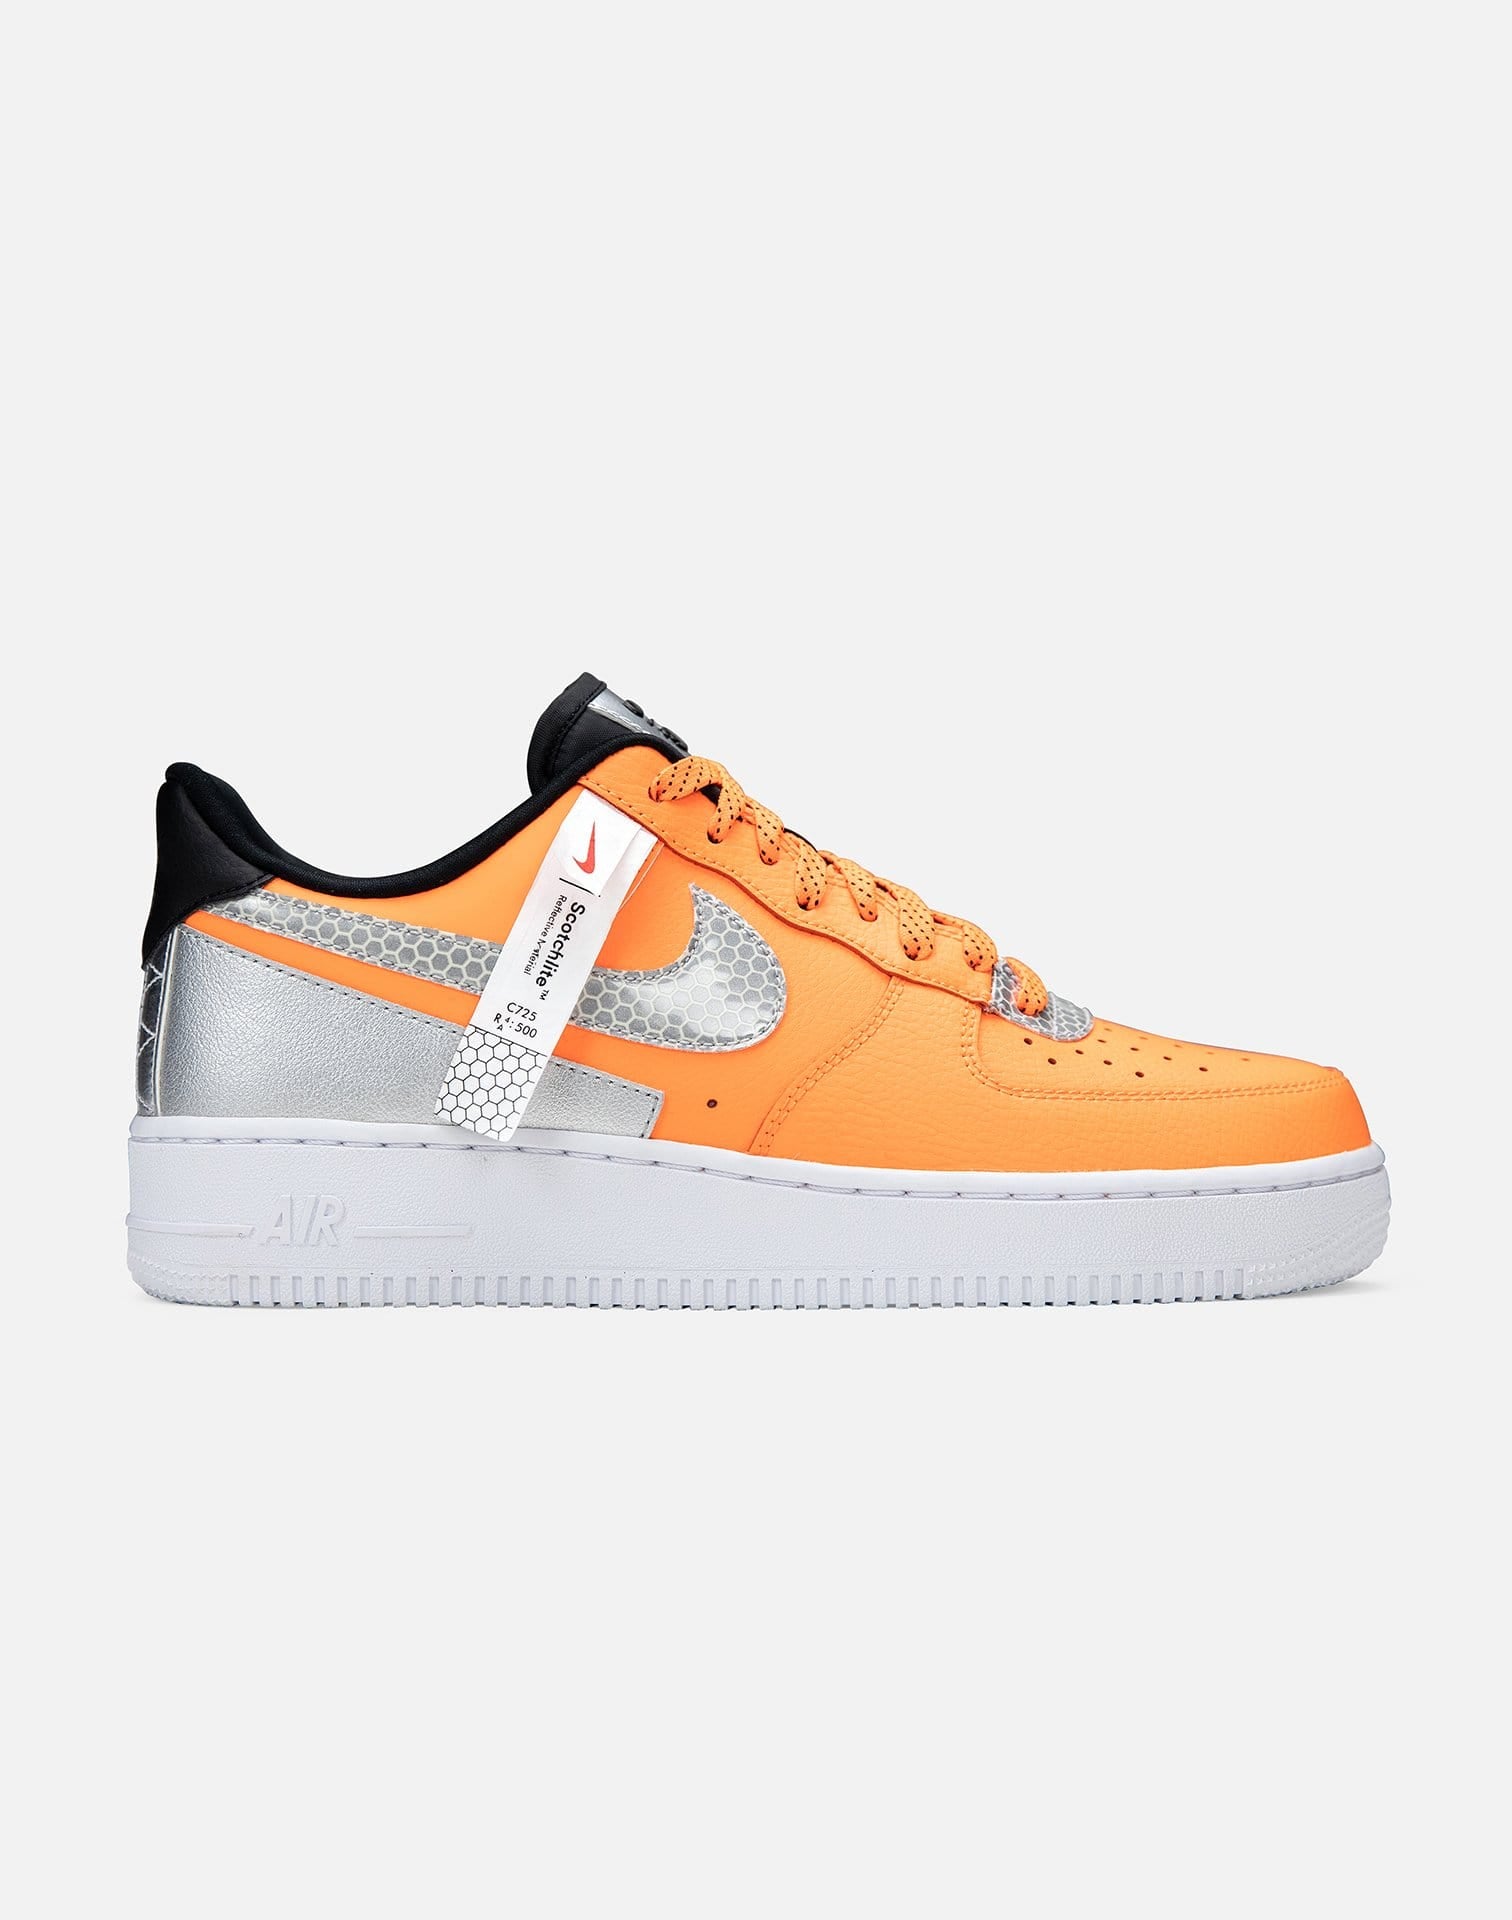 AIR FORCE 1 '07 LV8 LOW 3M – DTLR